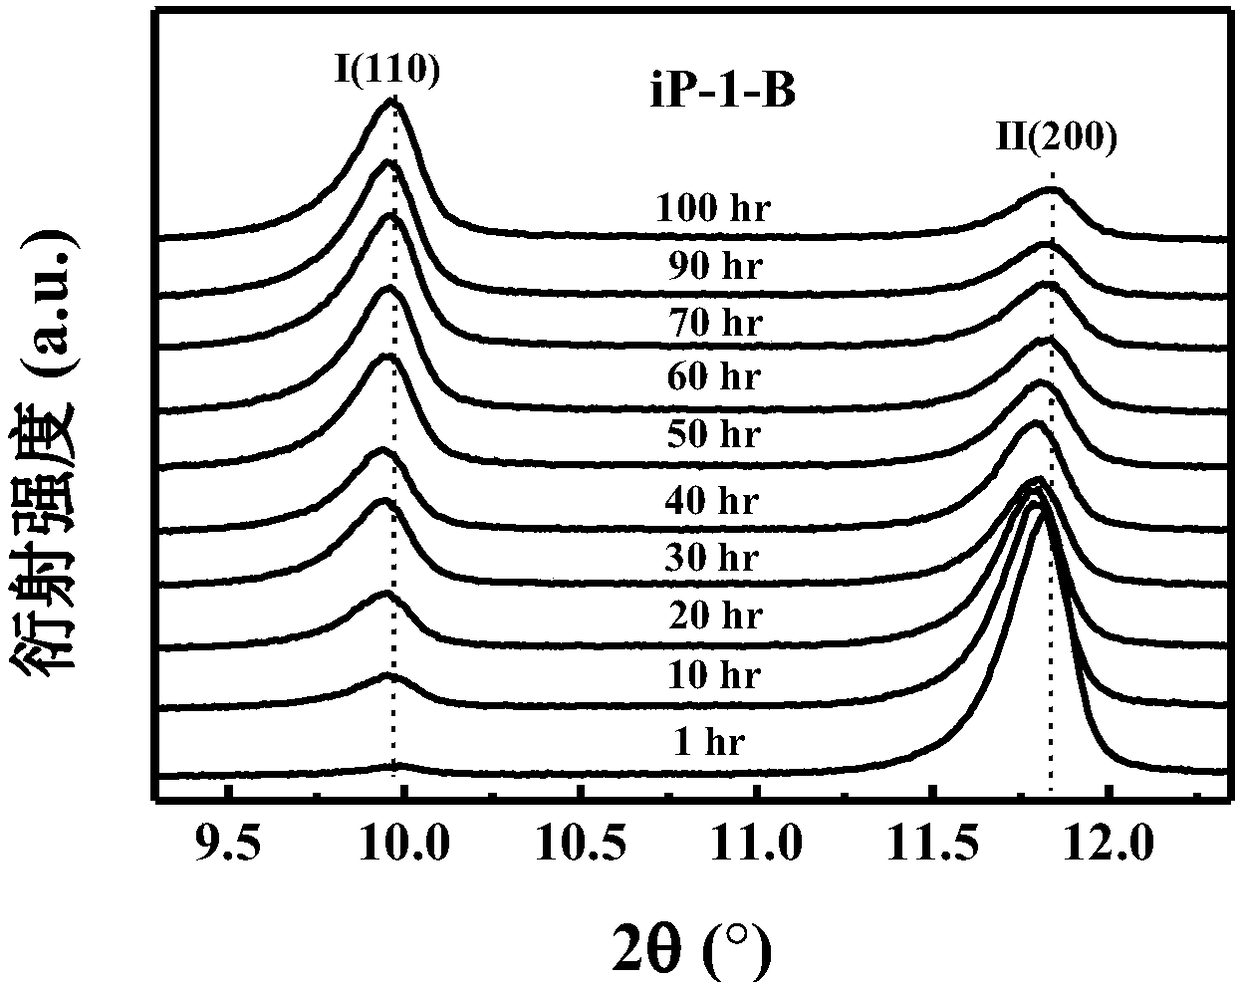 Method for promoting conversion of crystal form II in isotactic poly-1-butene composite into crystal form I by using high-energy electron irradiation